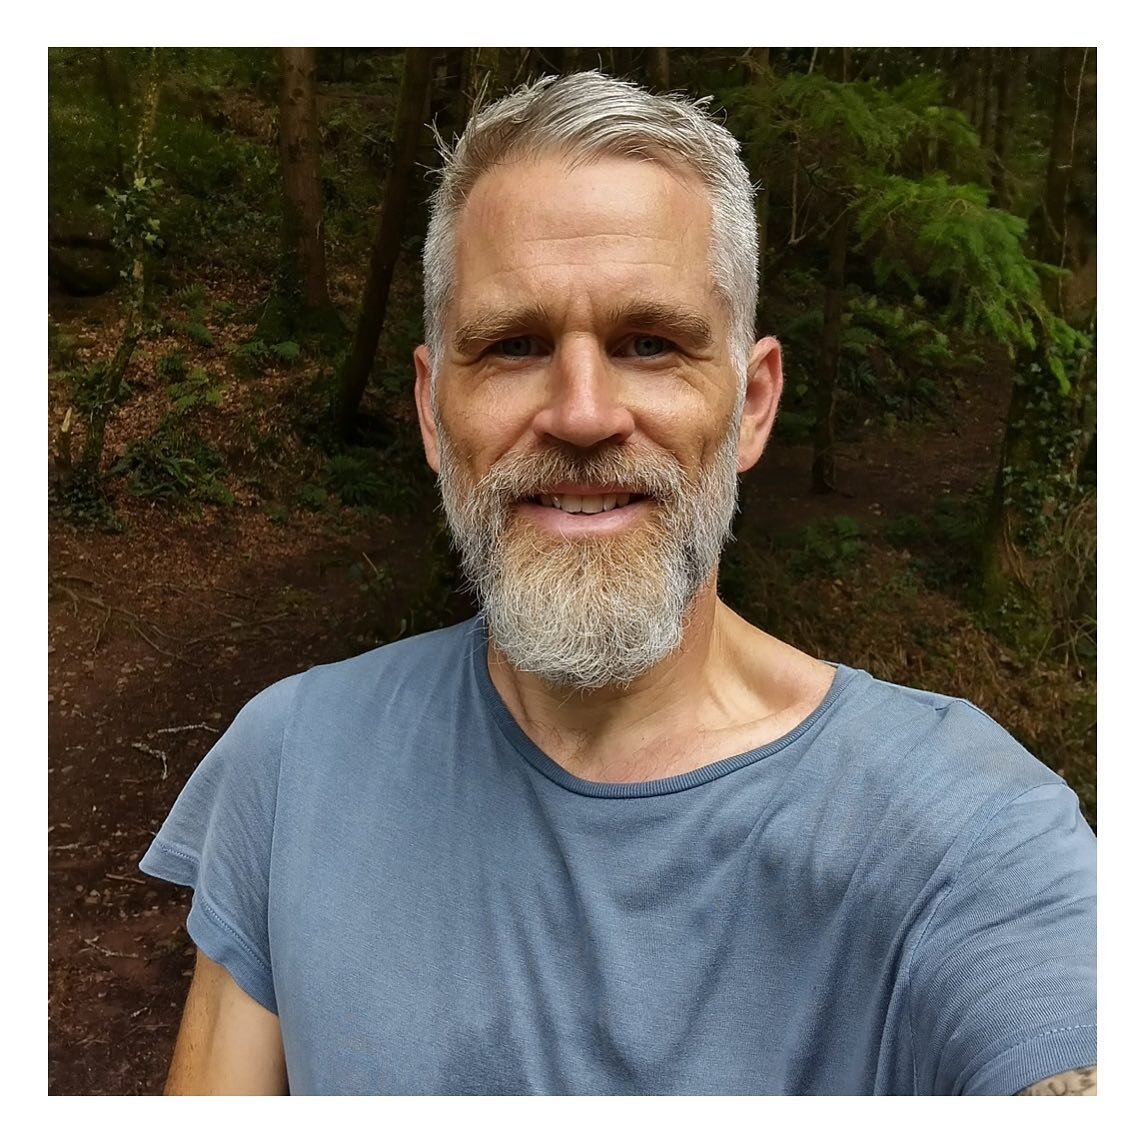 Introducing Kevin Cronin to the NatLifeCoach Family.

Kevin is based in Cork, Ireland INSTAGRAM: @restoremovement.ie 

Offering: Online / in person / group coaching

My name is Kevin Cronin, owner of Restore Movement. I am a Level 1 NATLIFECOACH, bod